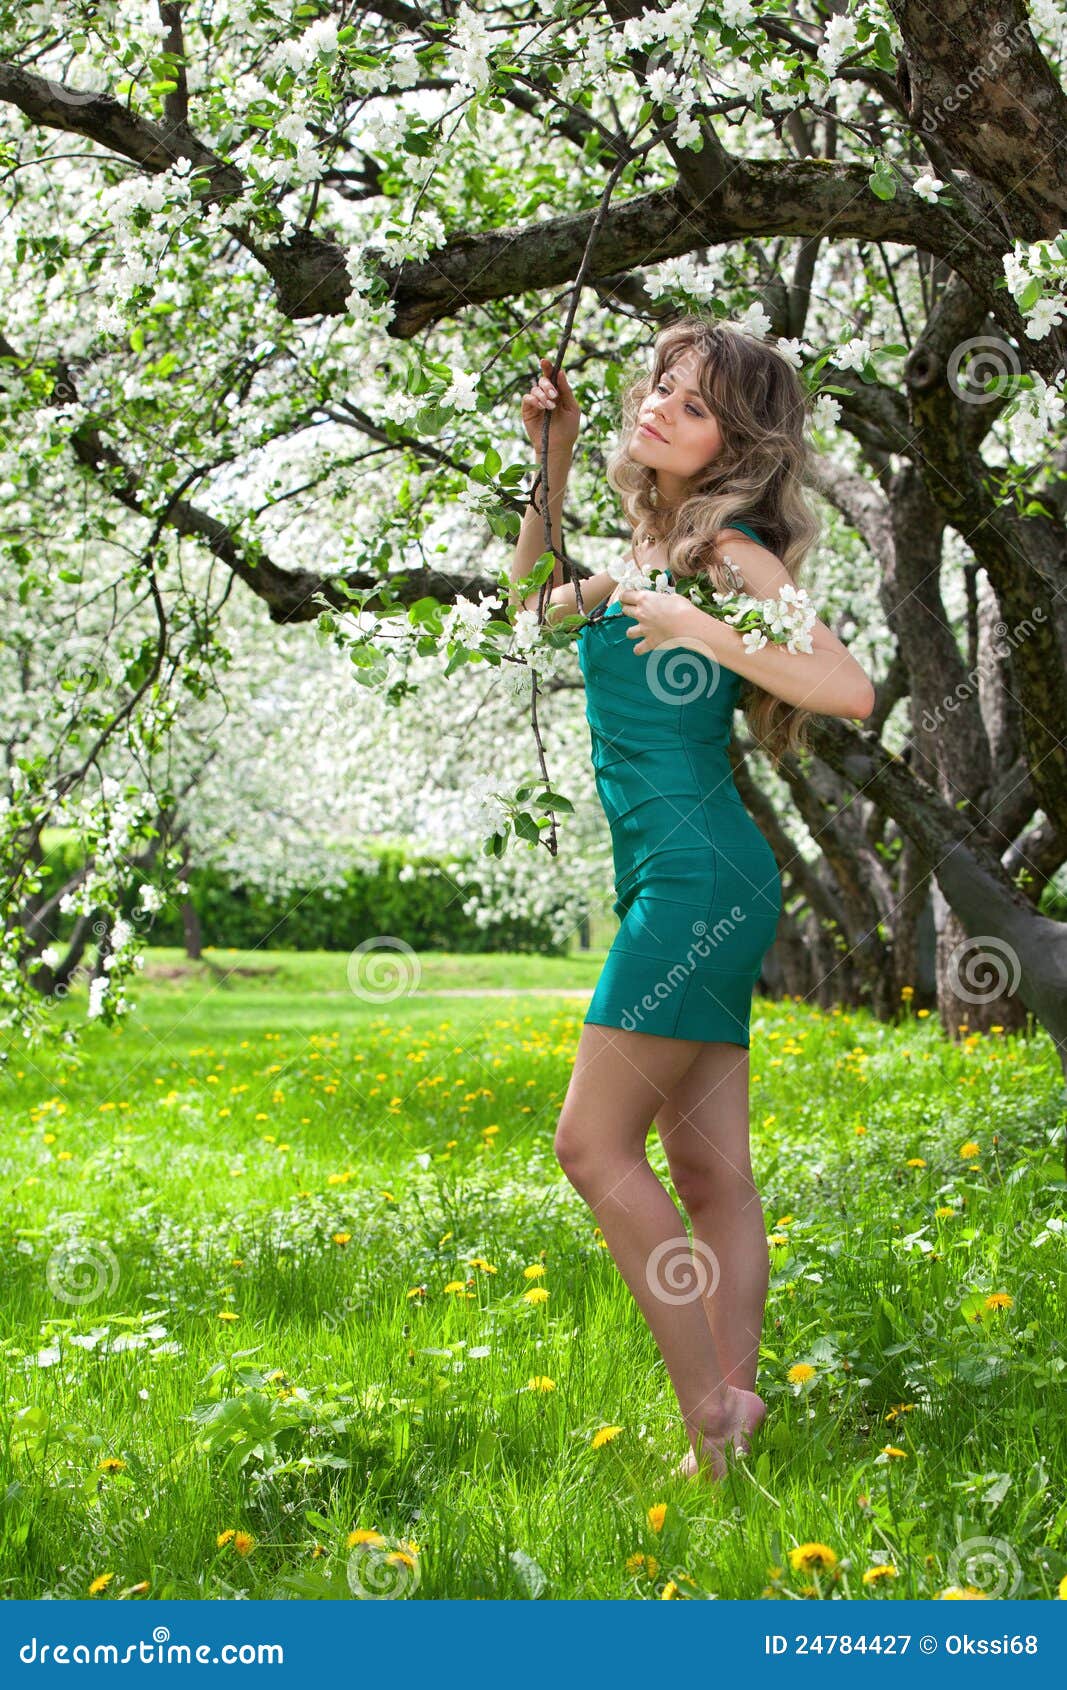 Girl In The Blossoming Garden Stock Image Image Of Woman Leaves 24784427